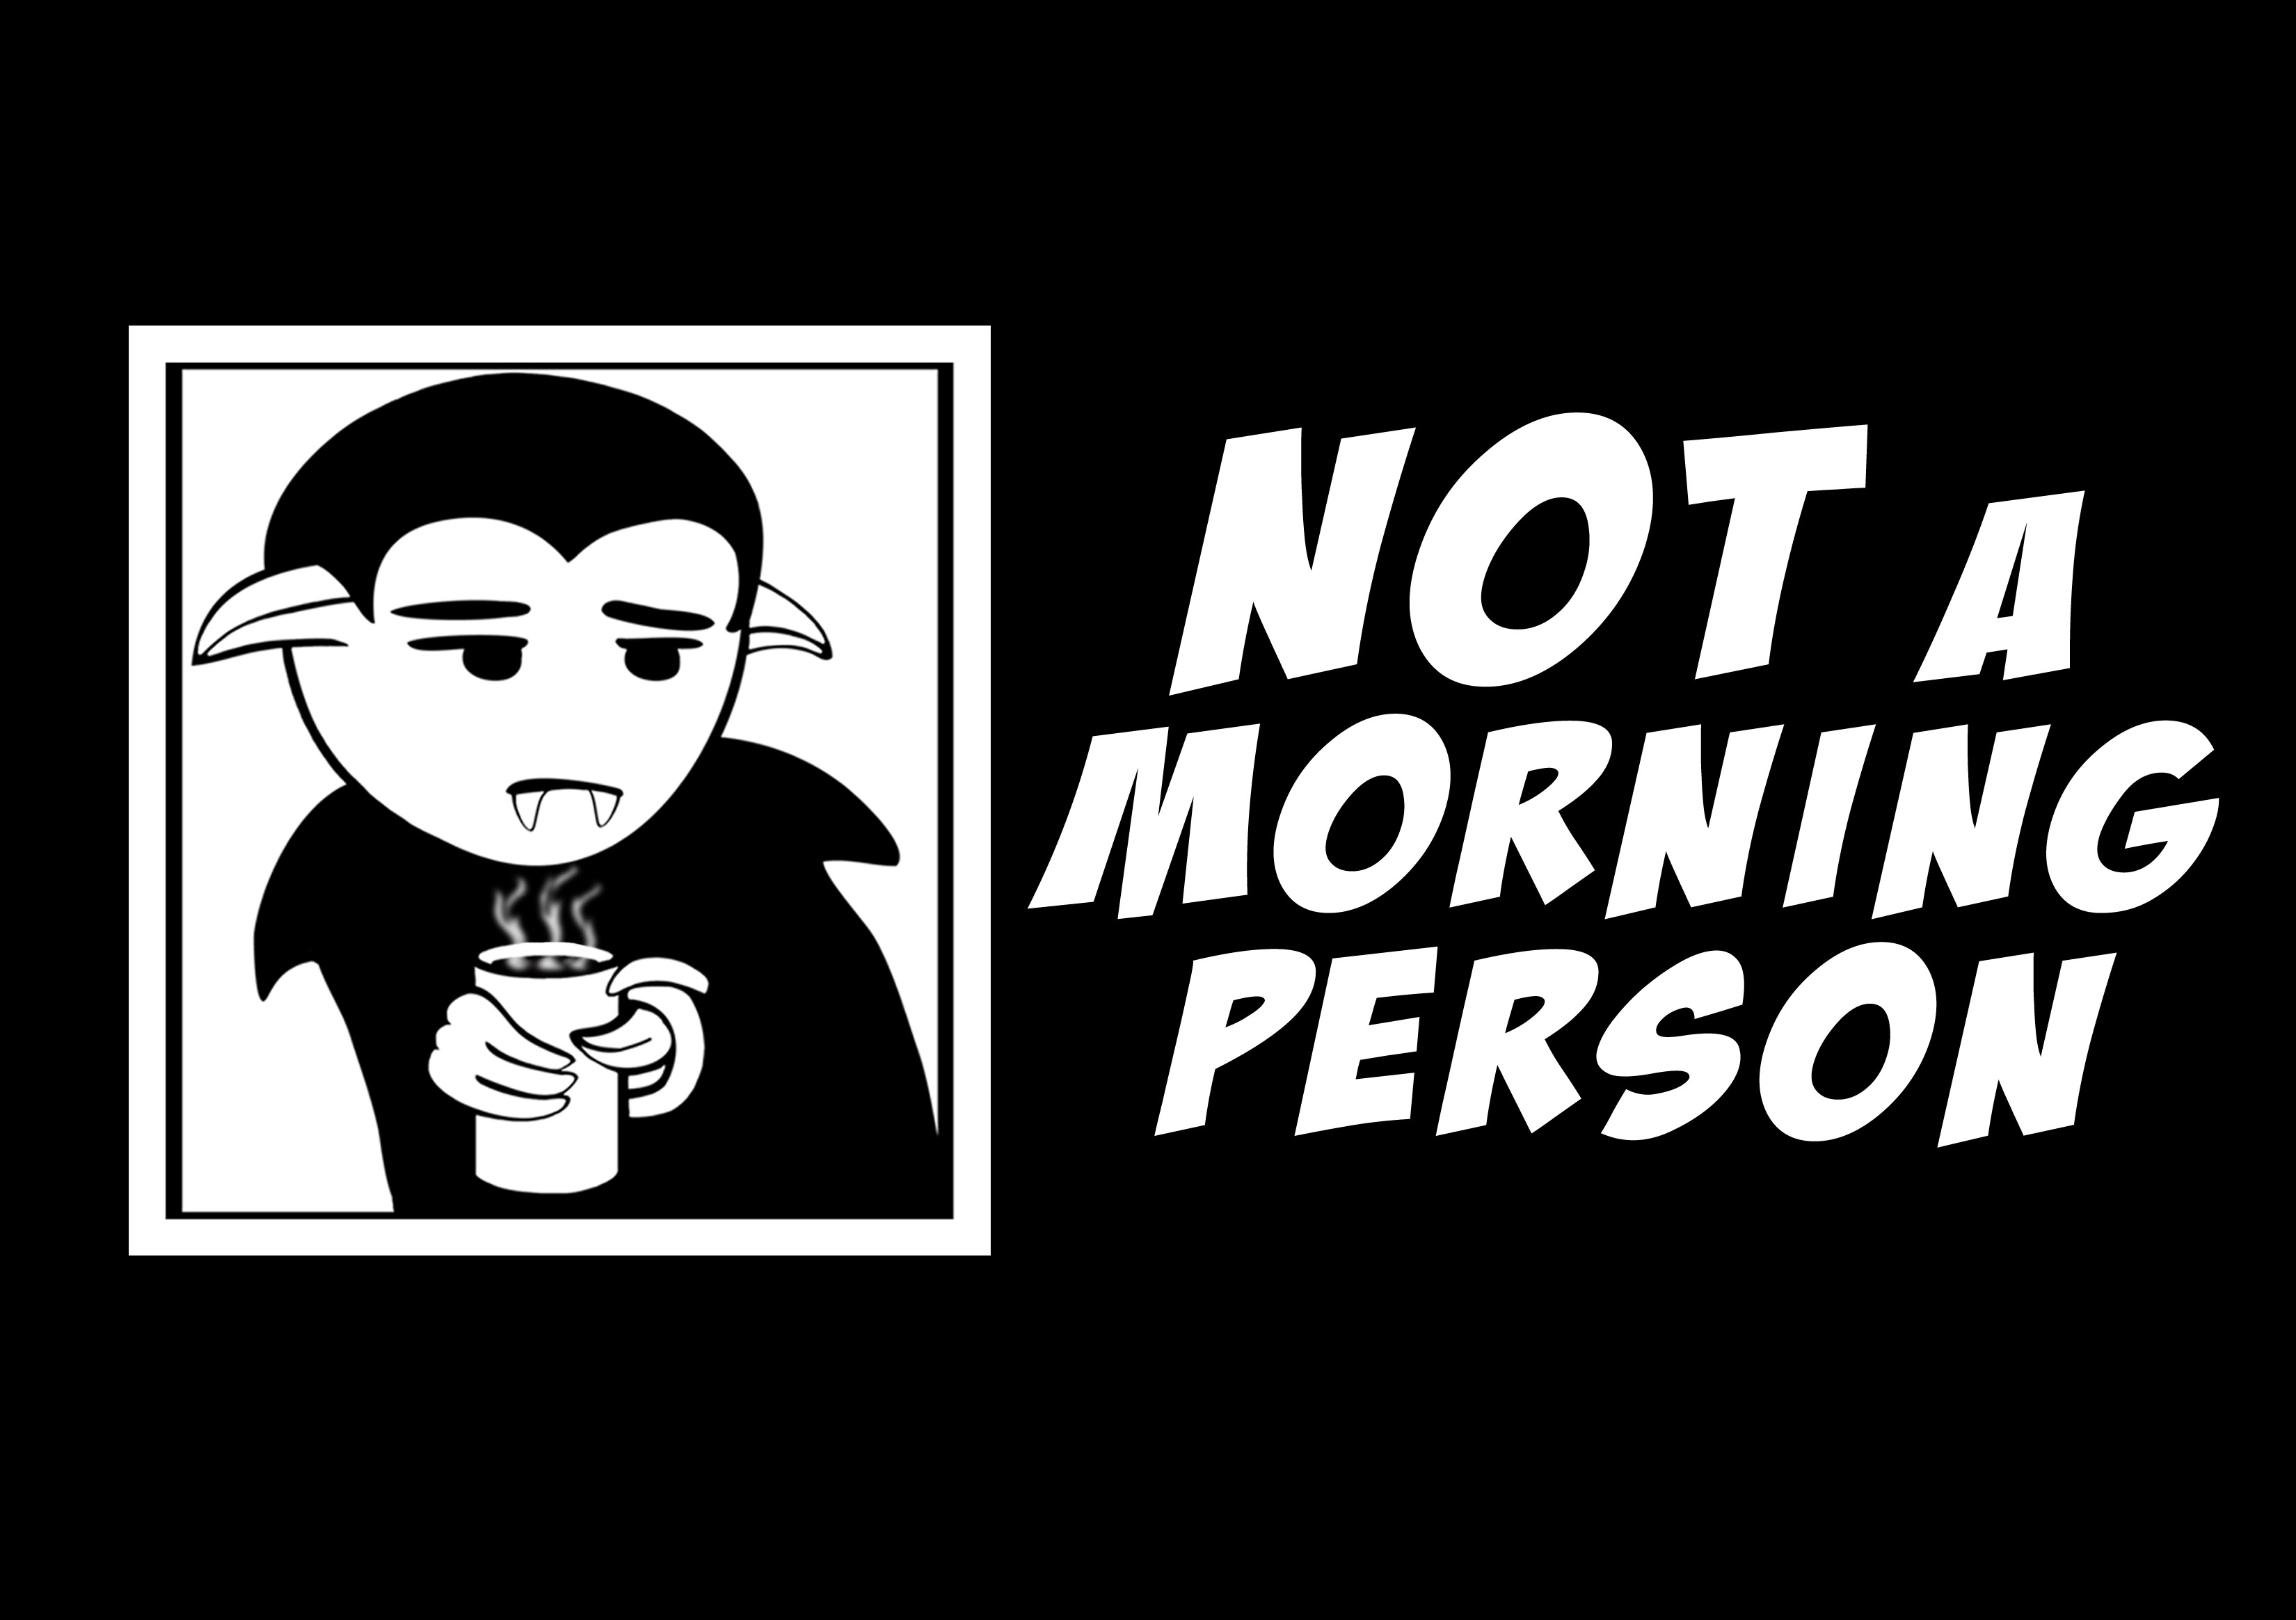 “Not a Morning Person” t-shirt design, featuring a tired Little Vampire holding a mug of coffee